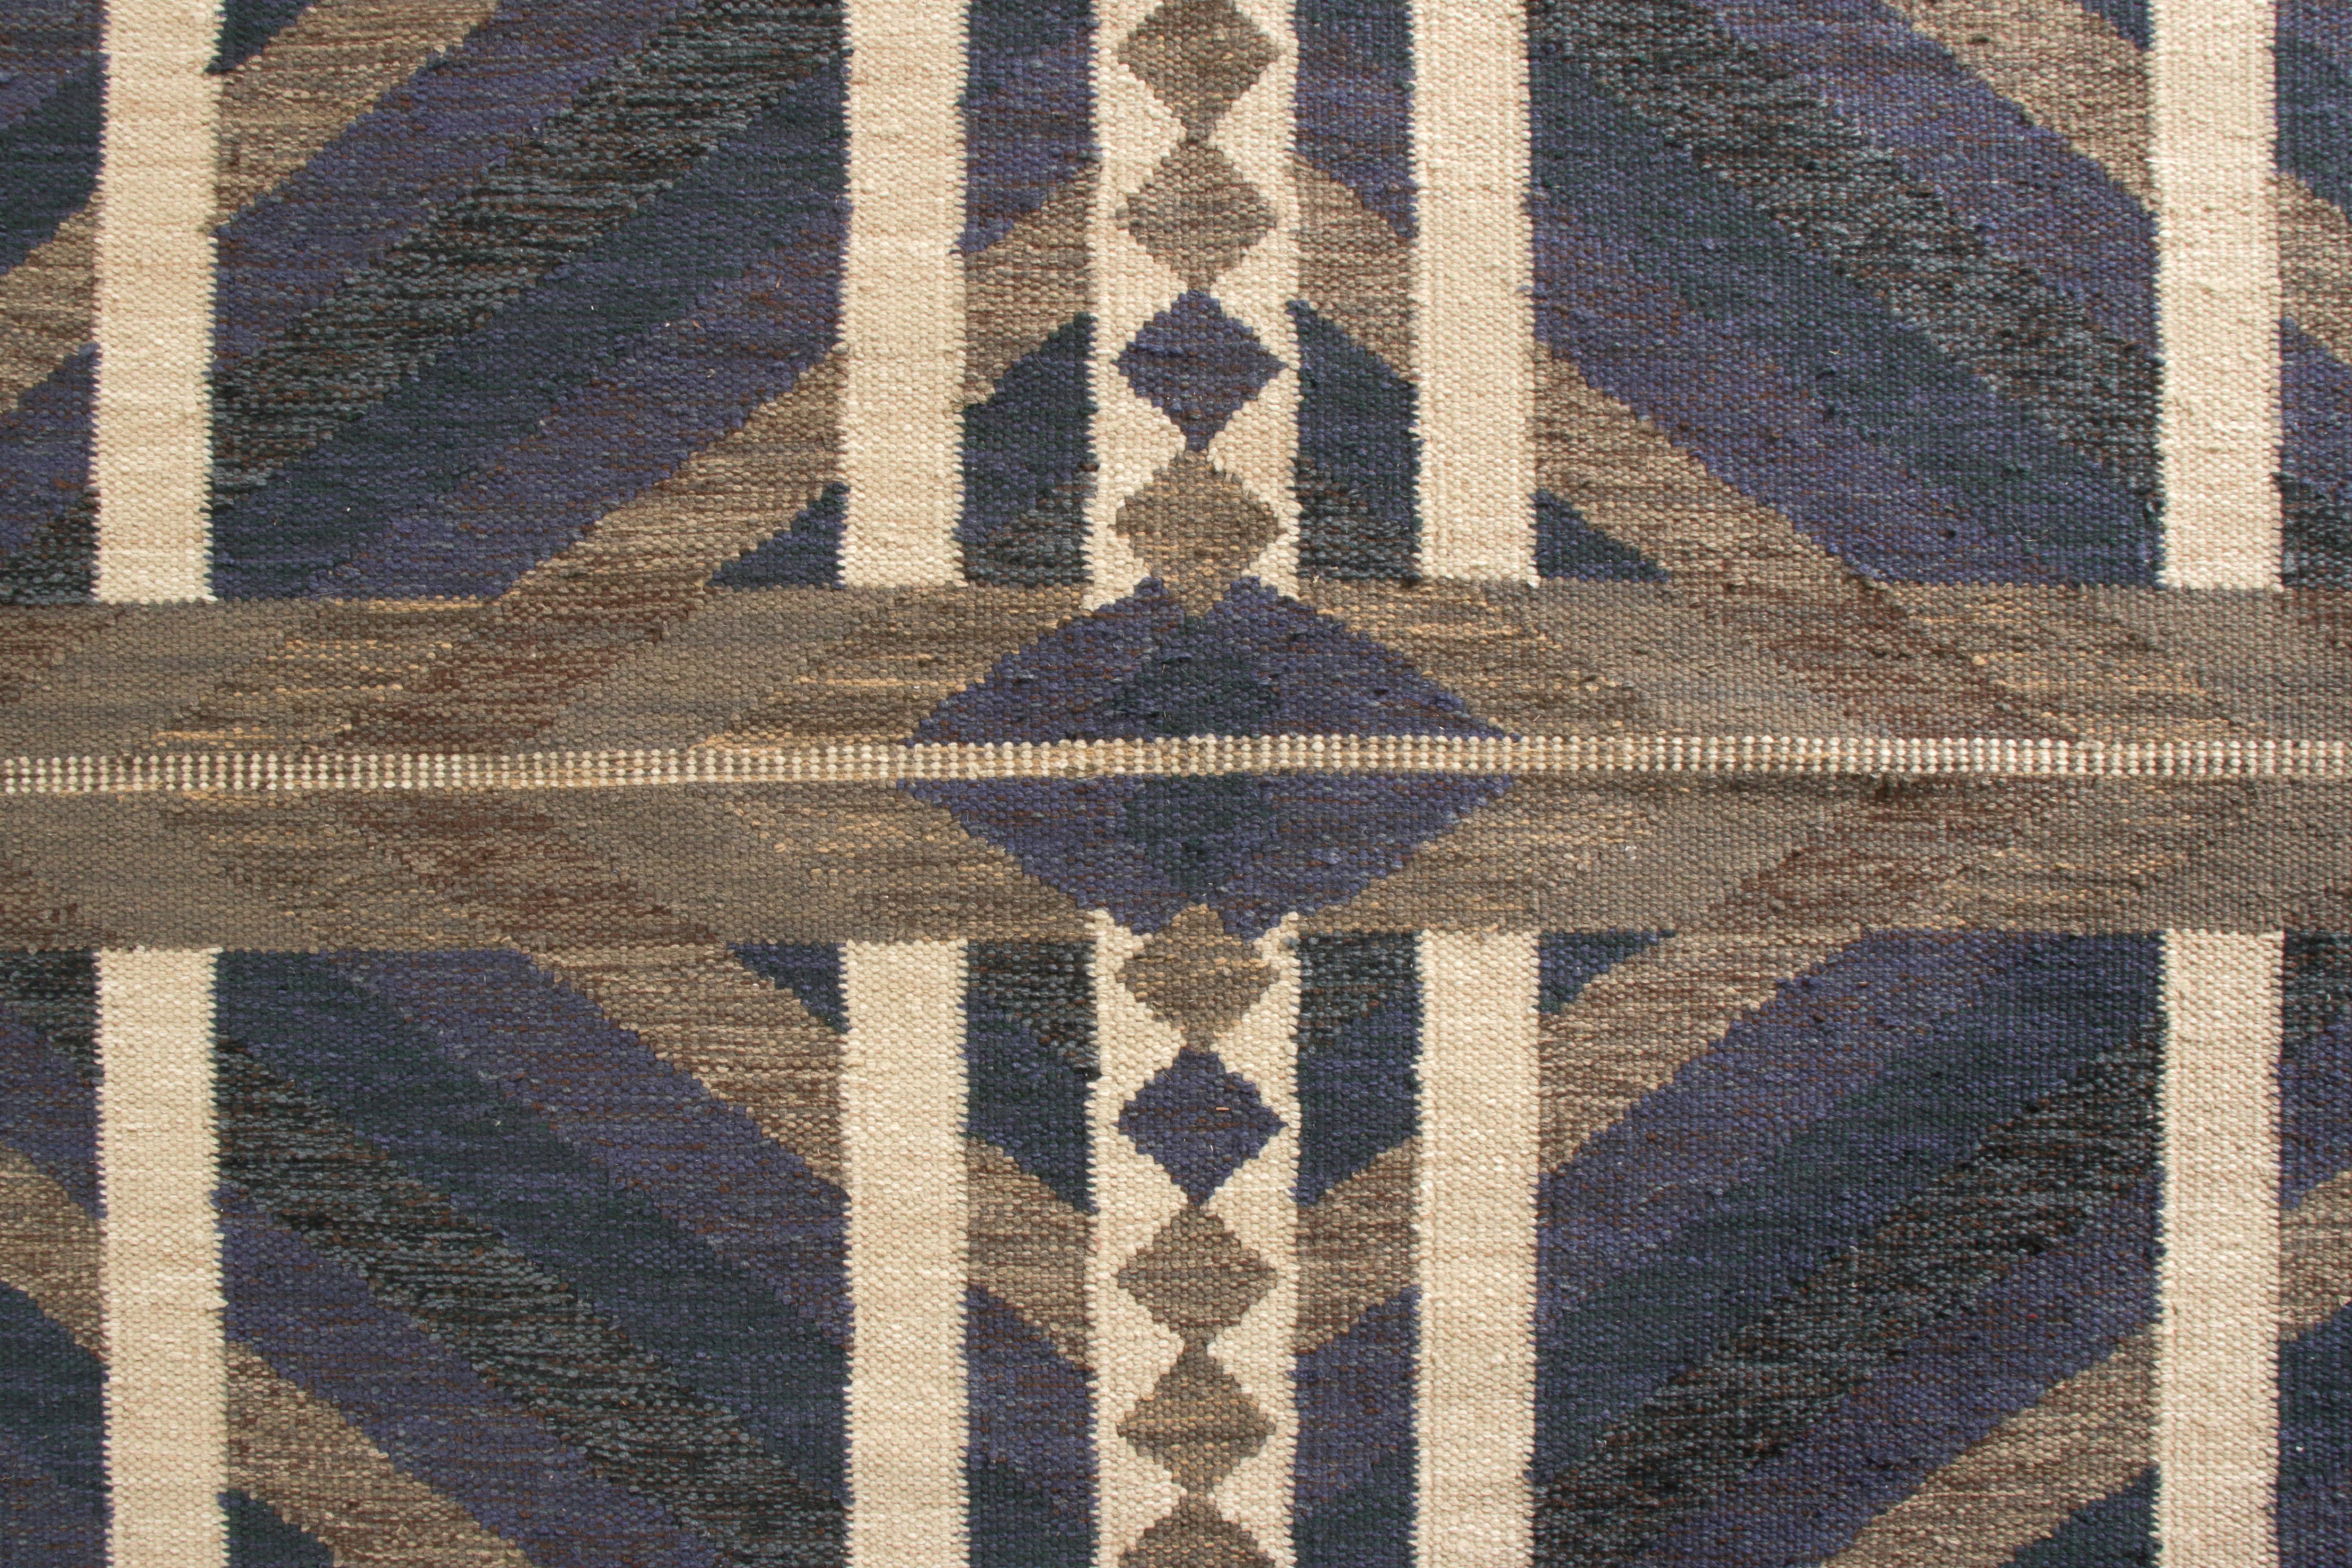 Hand-Knotted Rug & Kilim’s Scandinavian Style Kilim Rug in Blue, Beige-Brown Geometric Patter For Sale